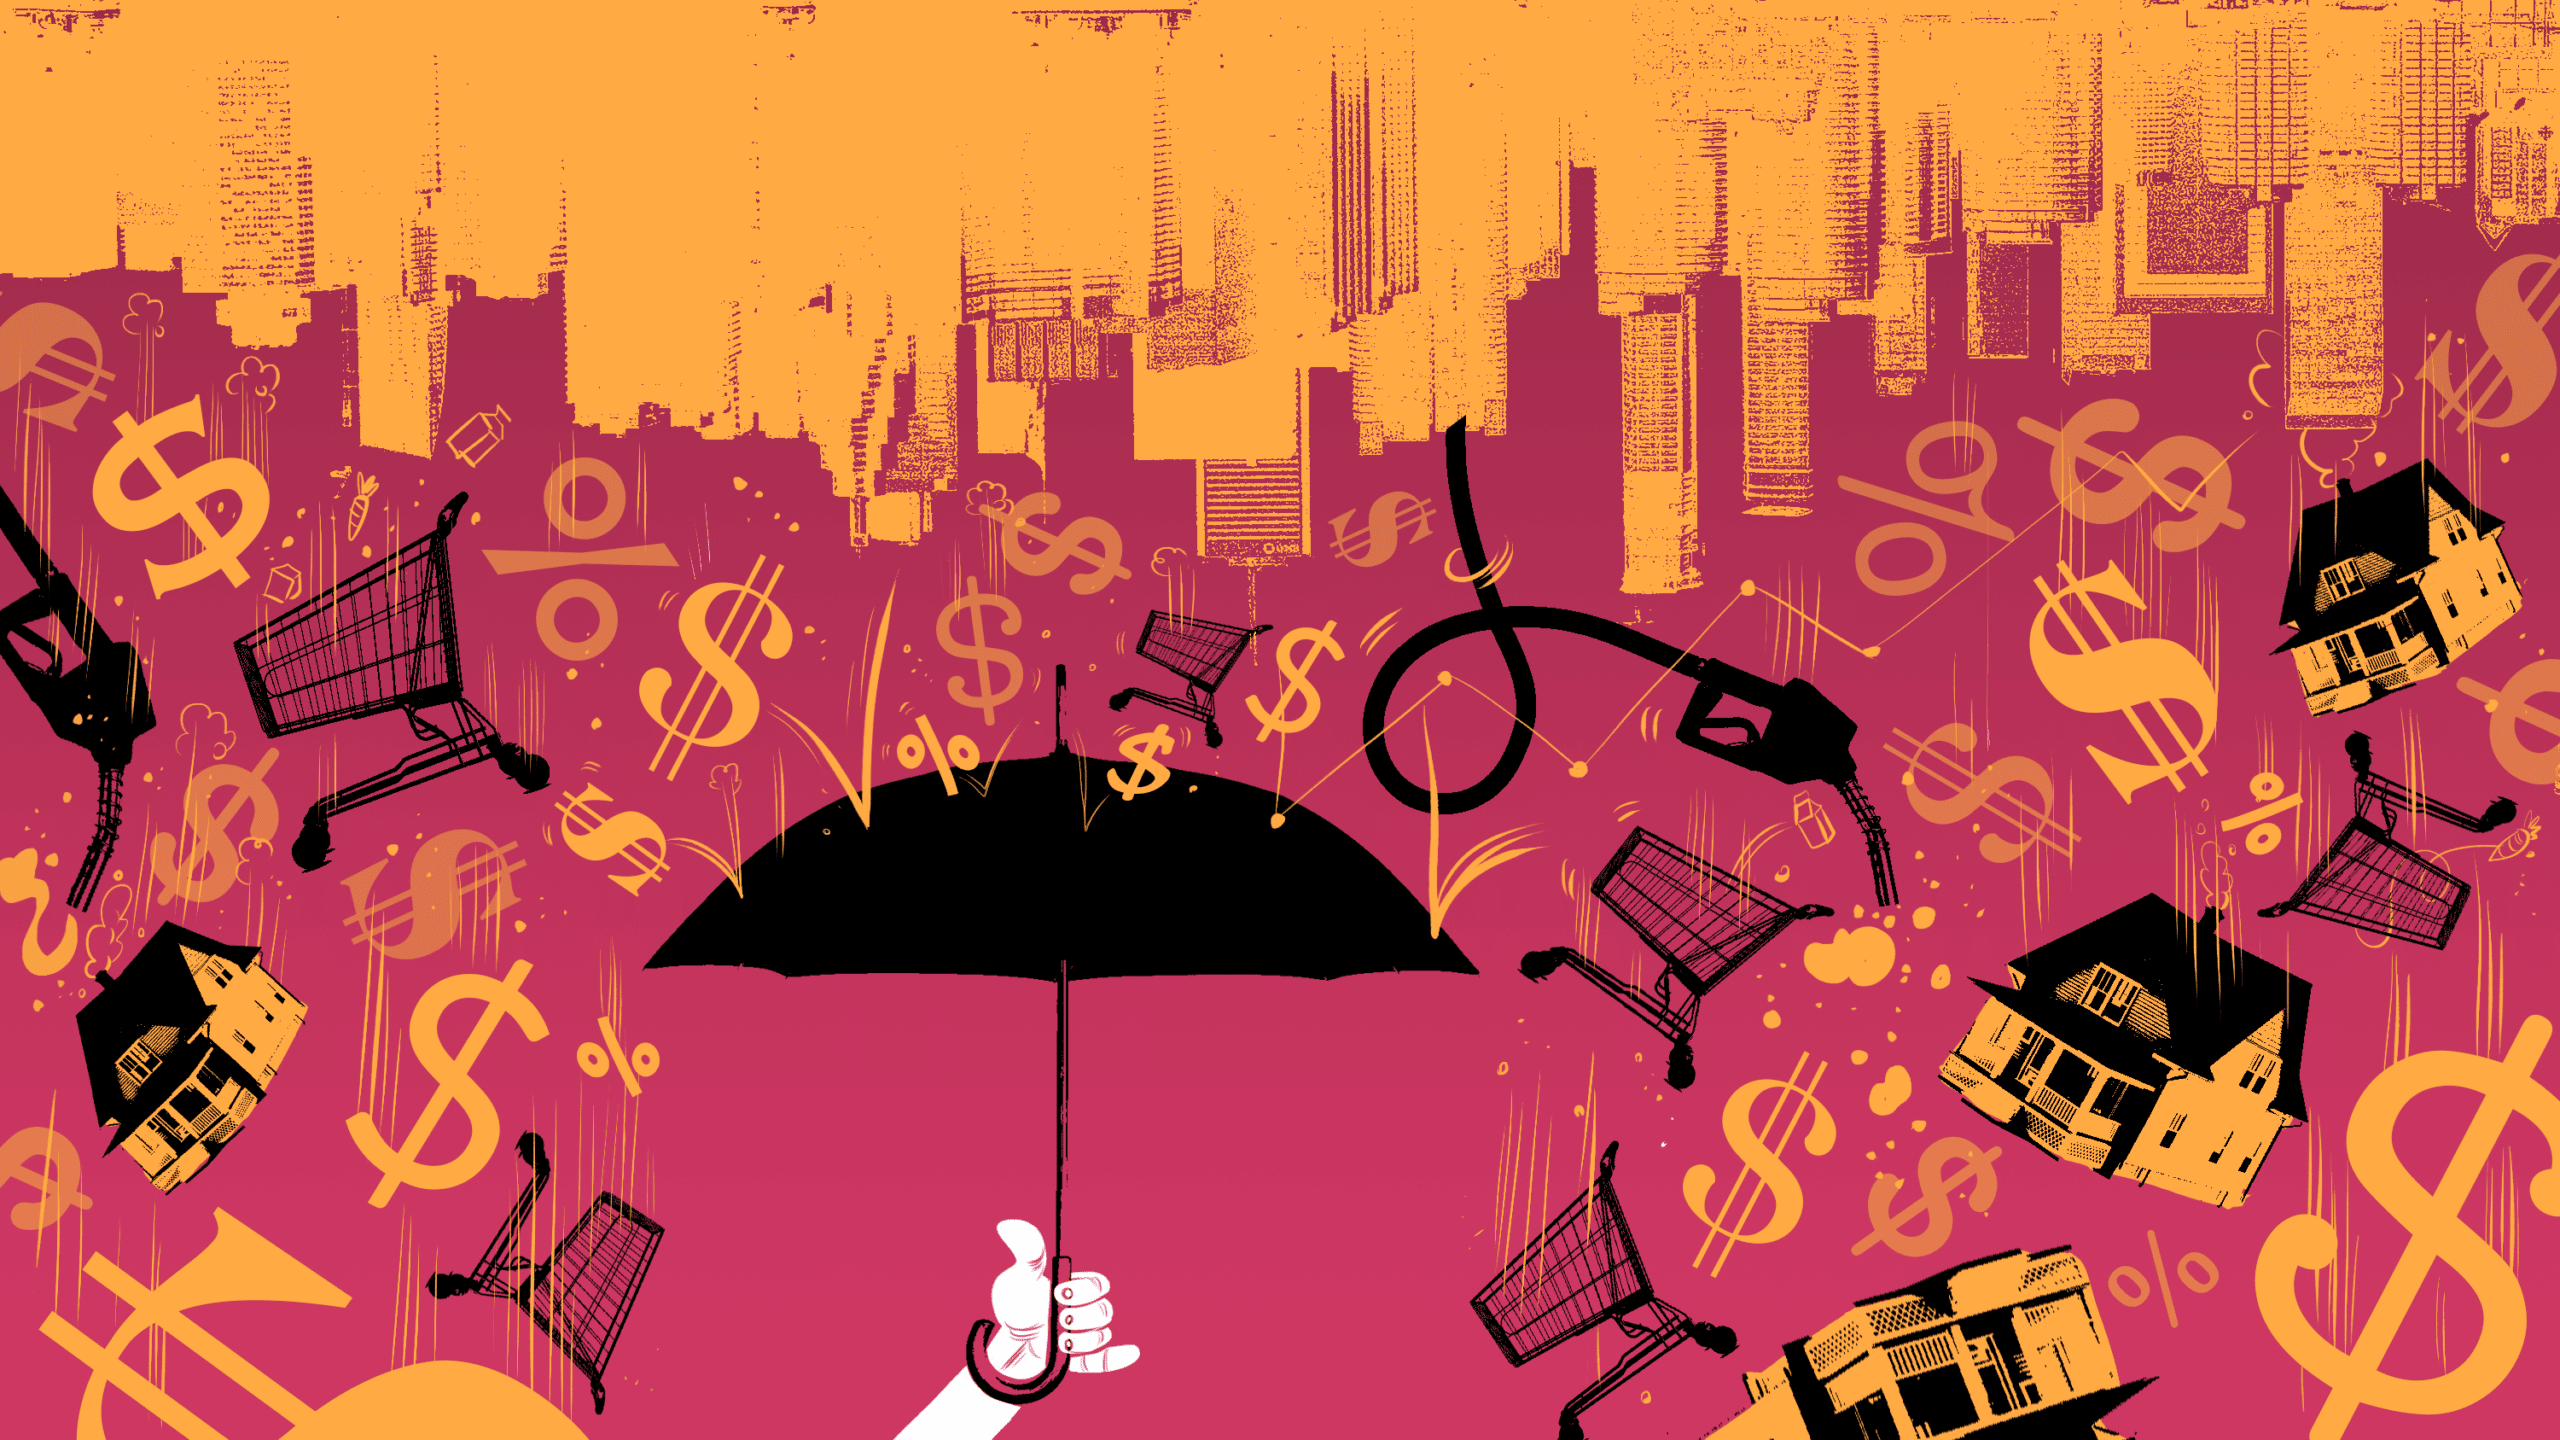 Hand holding umbrella as upside cityscape rains dollar signs, shopping carts, houses, and other financial symbols...